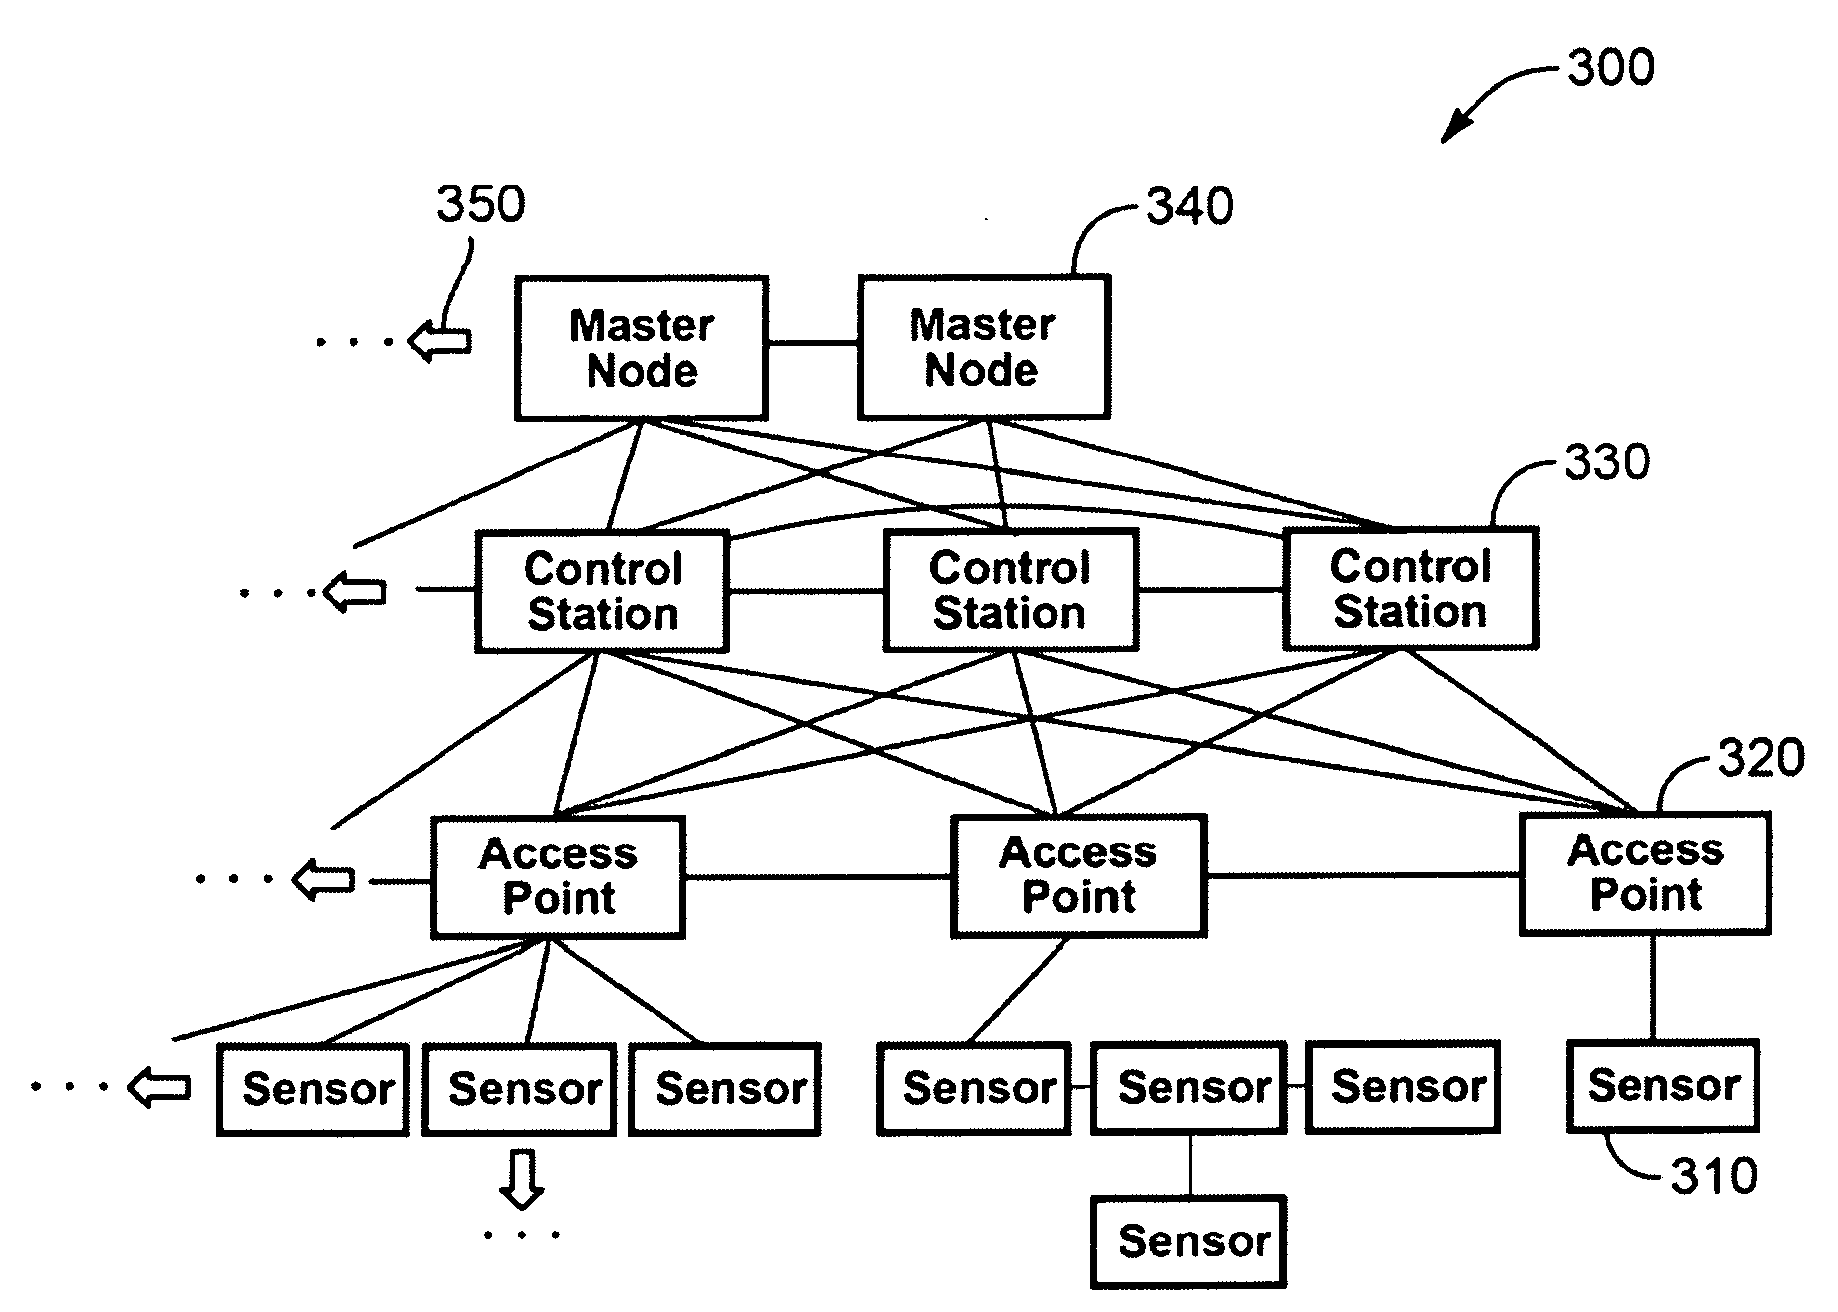 Technique and Architecture for Cognitive Coordination of Resources in a Distributed Network